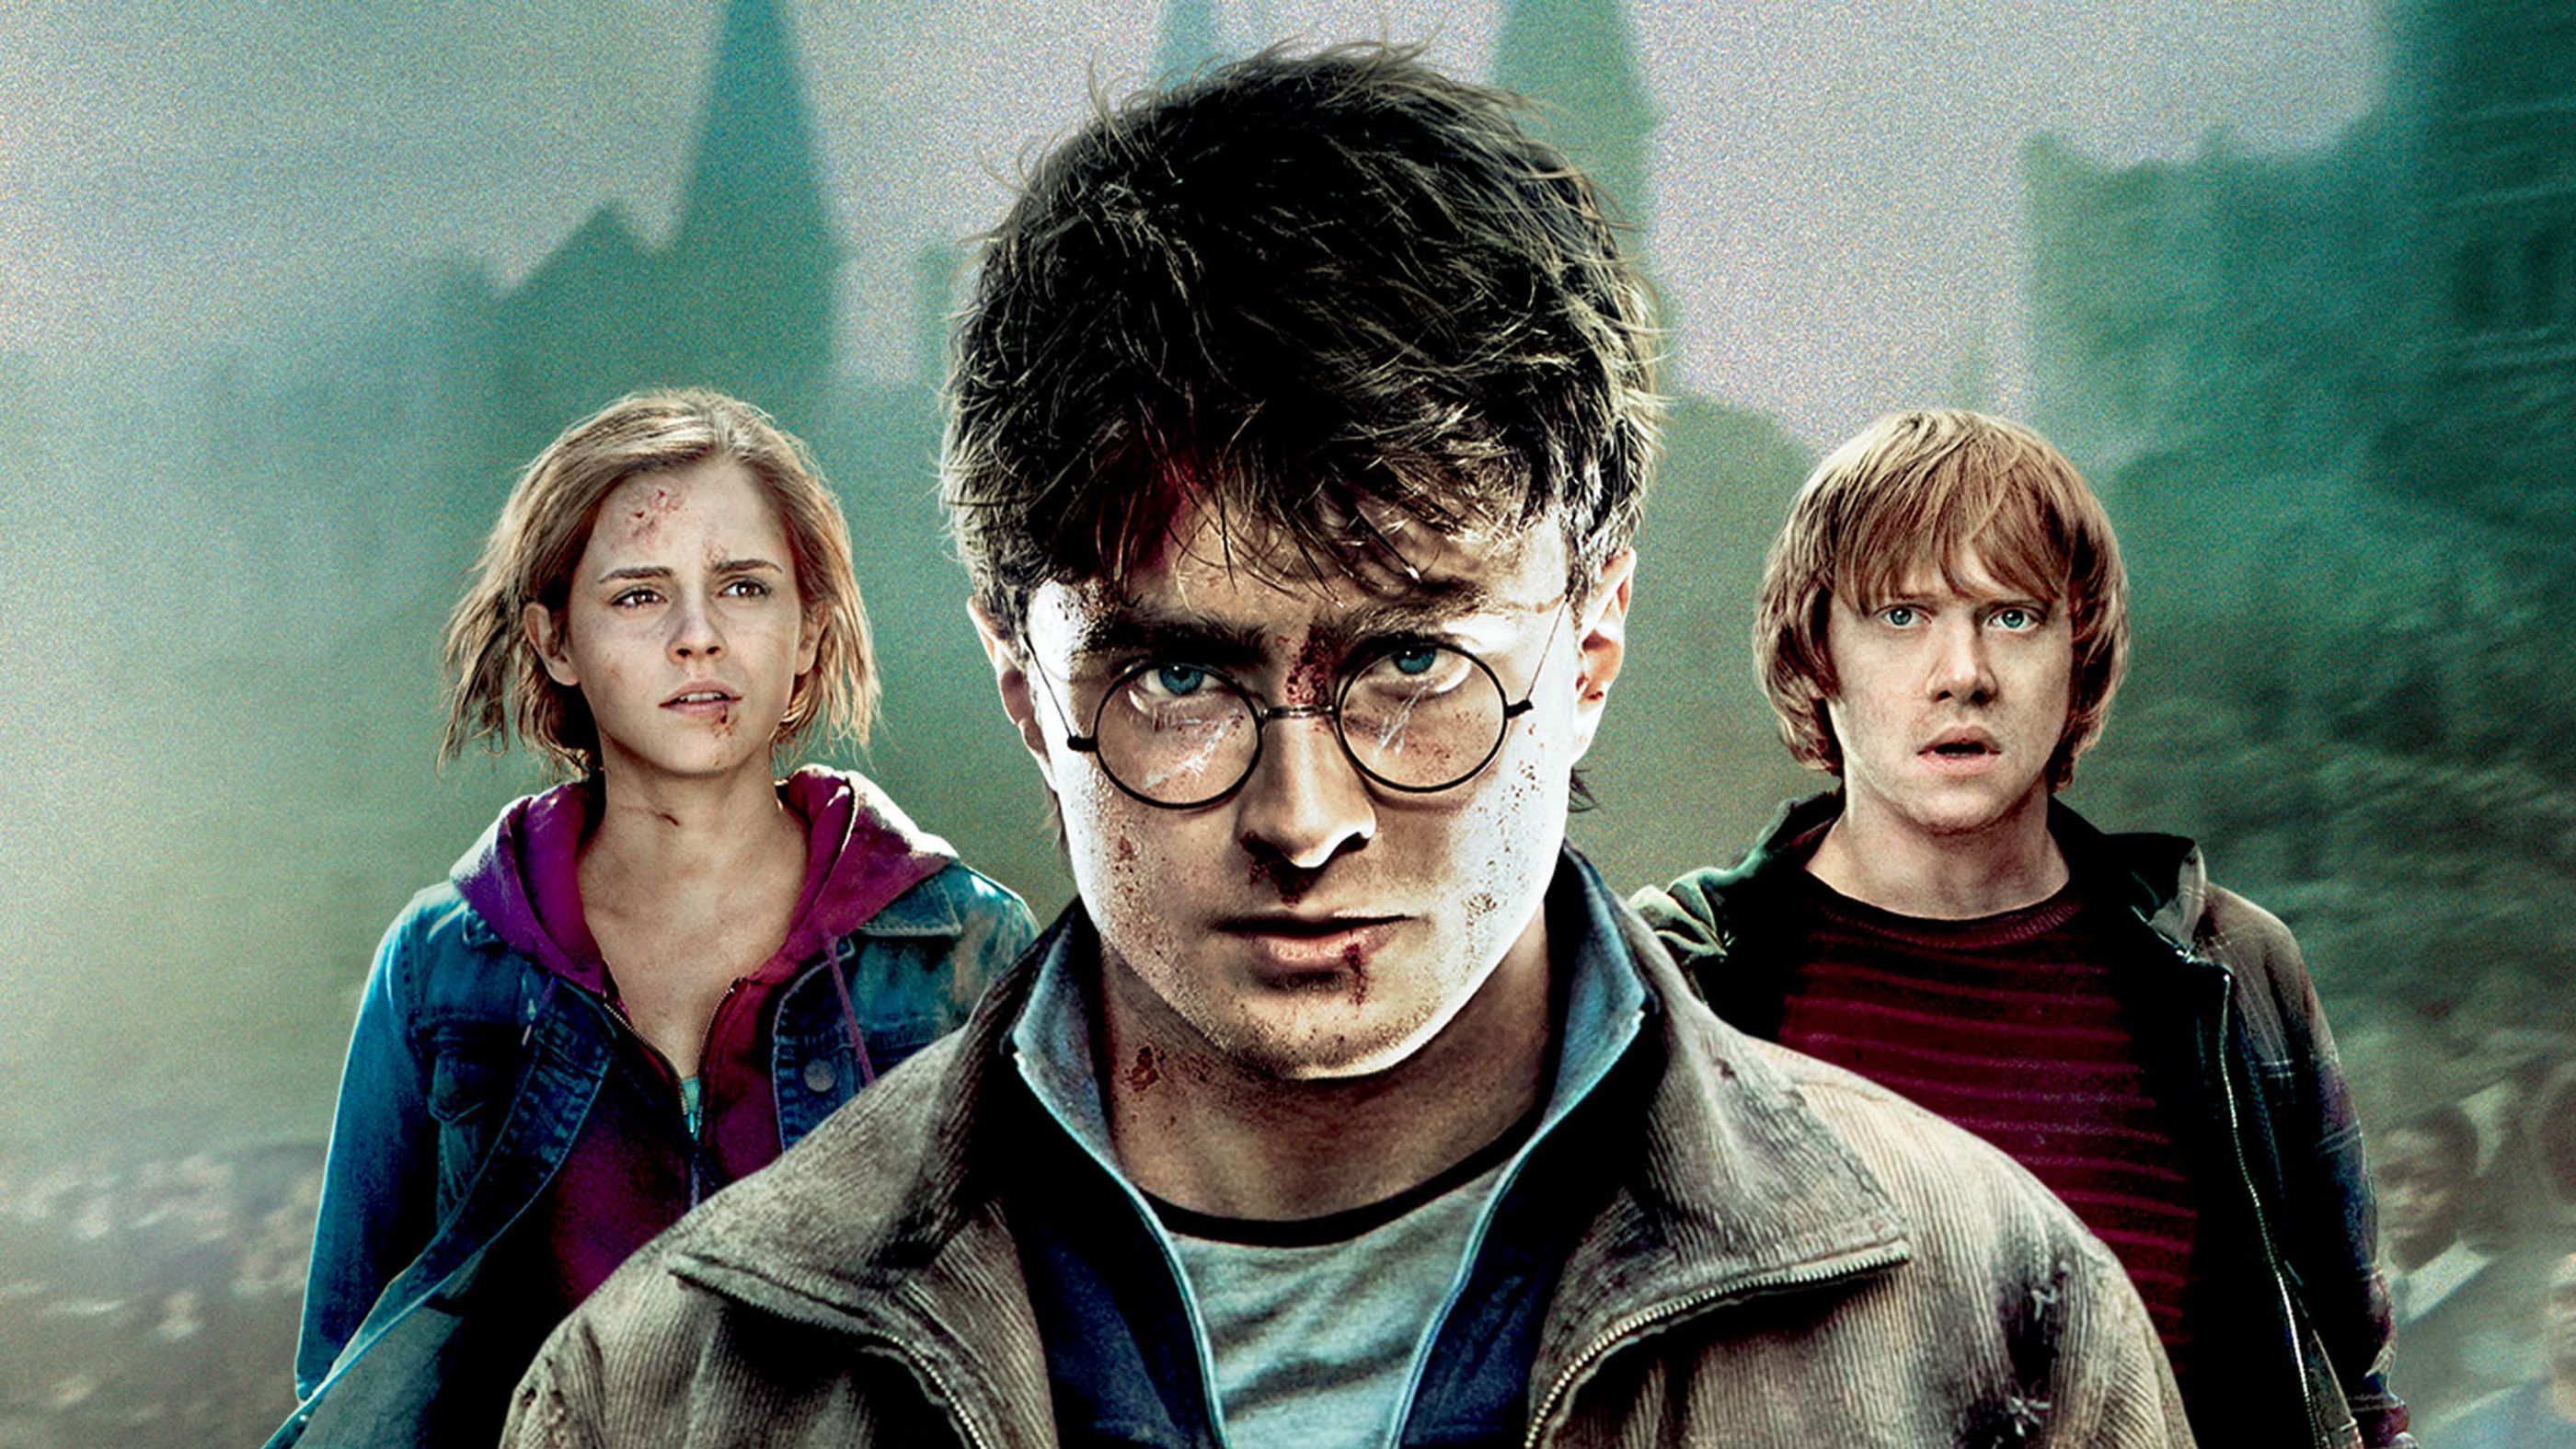 Harry Potter and the Deathly Hallows, Part 2 | Full Movie | Movies Anywhere